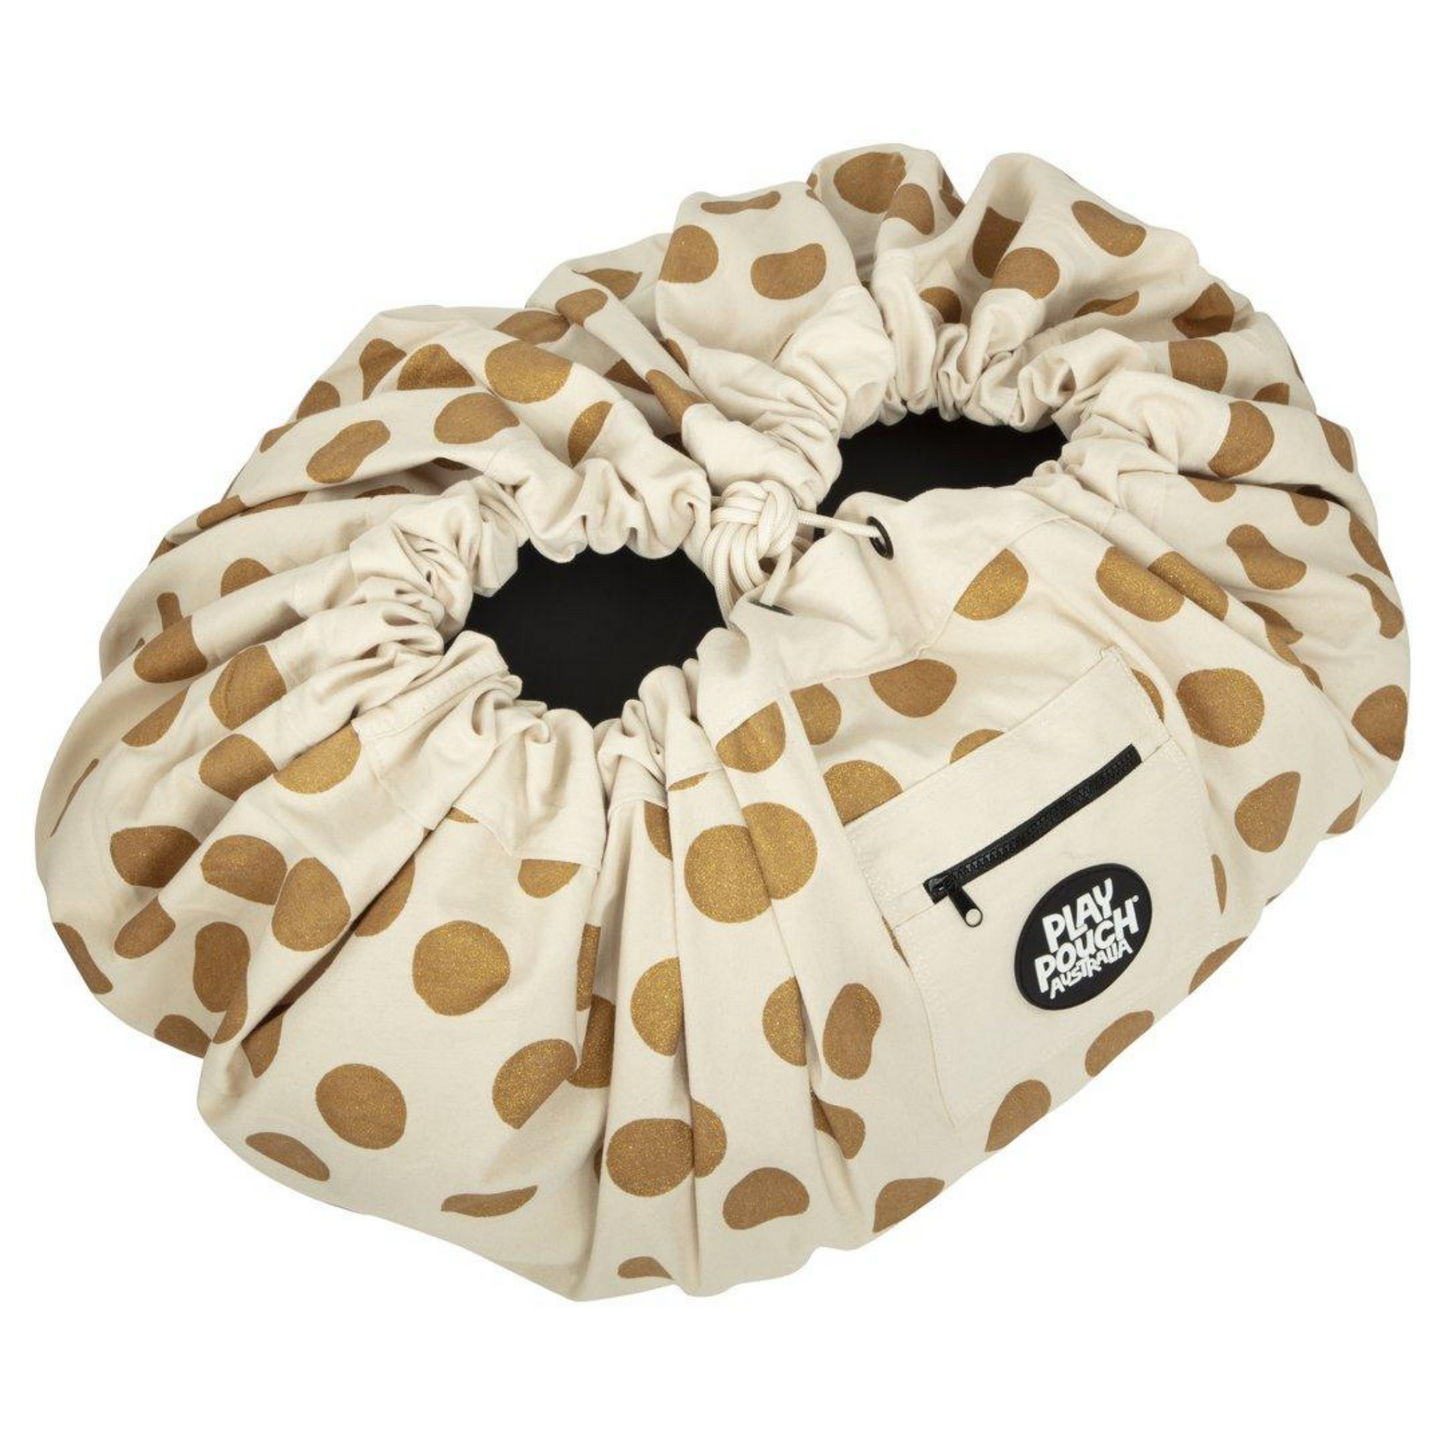 PLAY POUCH - Printed Play Pouch | Glitter Gold Dots